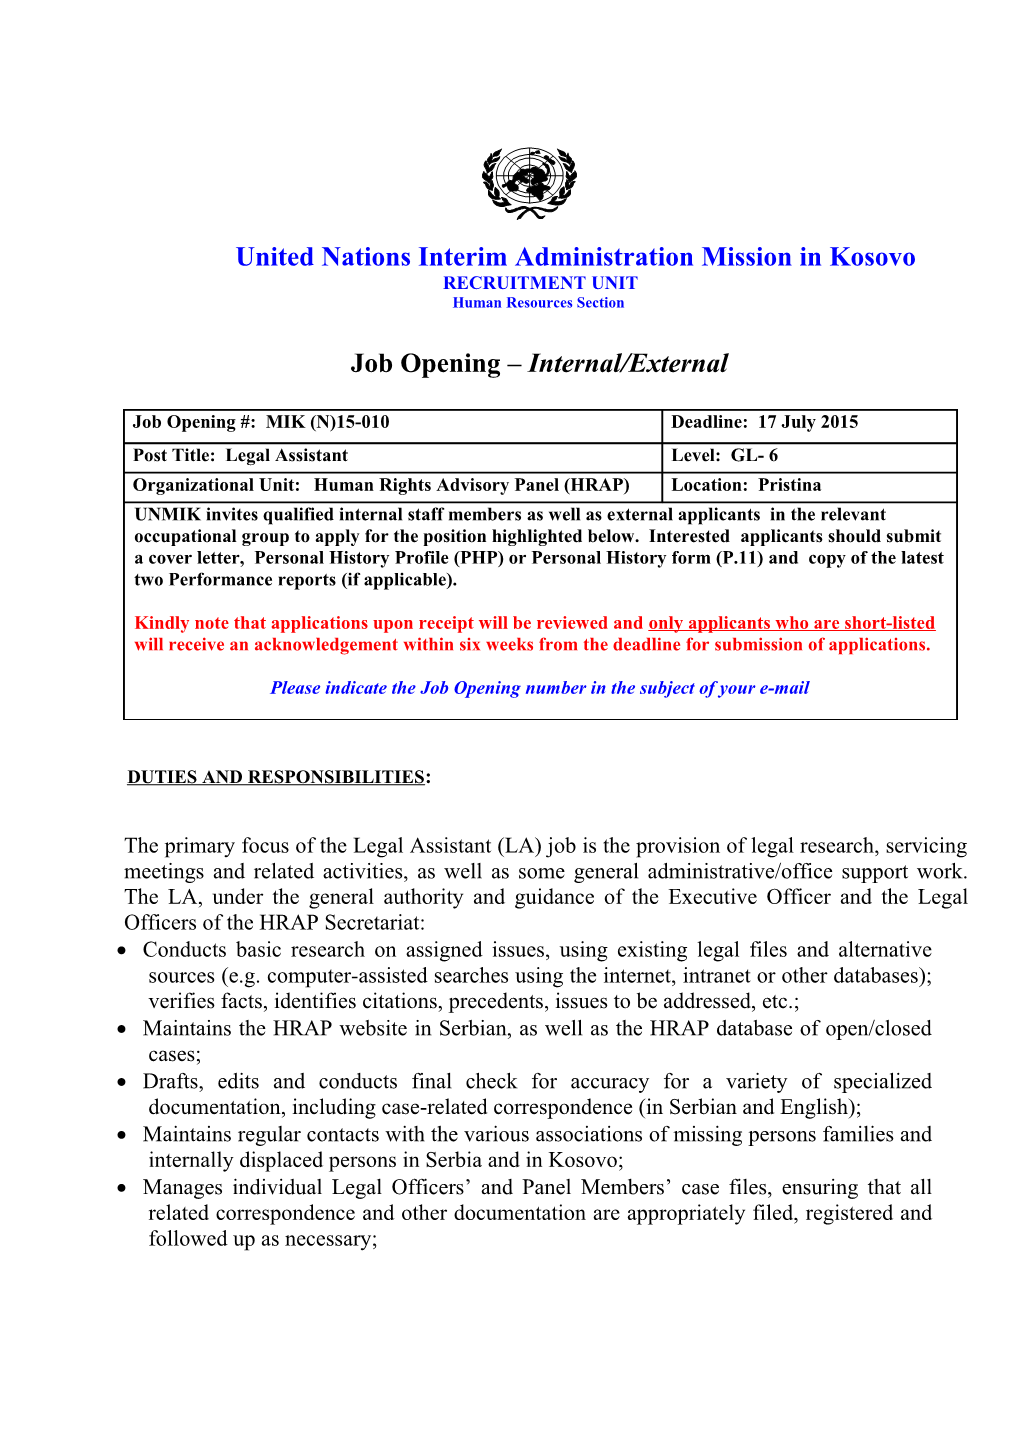 Legal Assistant, GL-6 Level in the Human Rights Advisory Panel (HRAP)